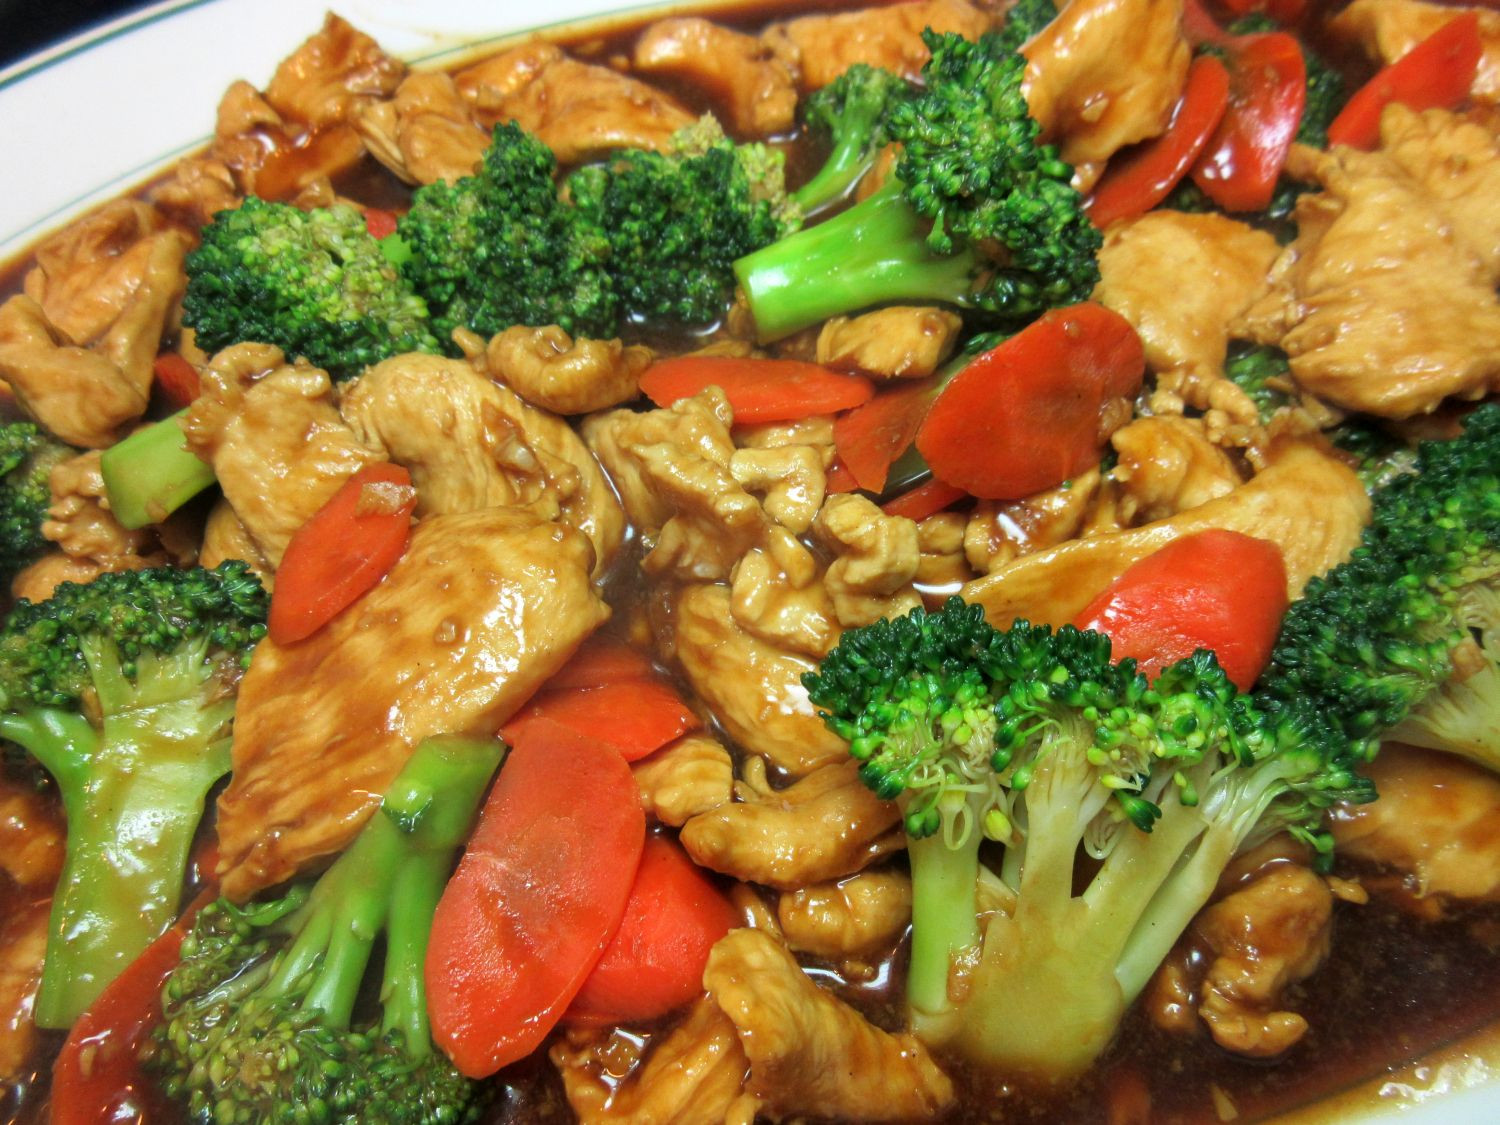 Chinese Chicken And Broccoli Stir Fry Recipes
 Tess Cooks4u How to Make the Best Chicken and Broccoli